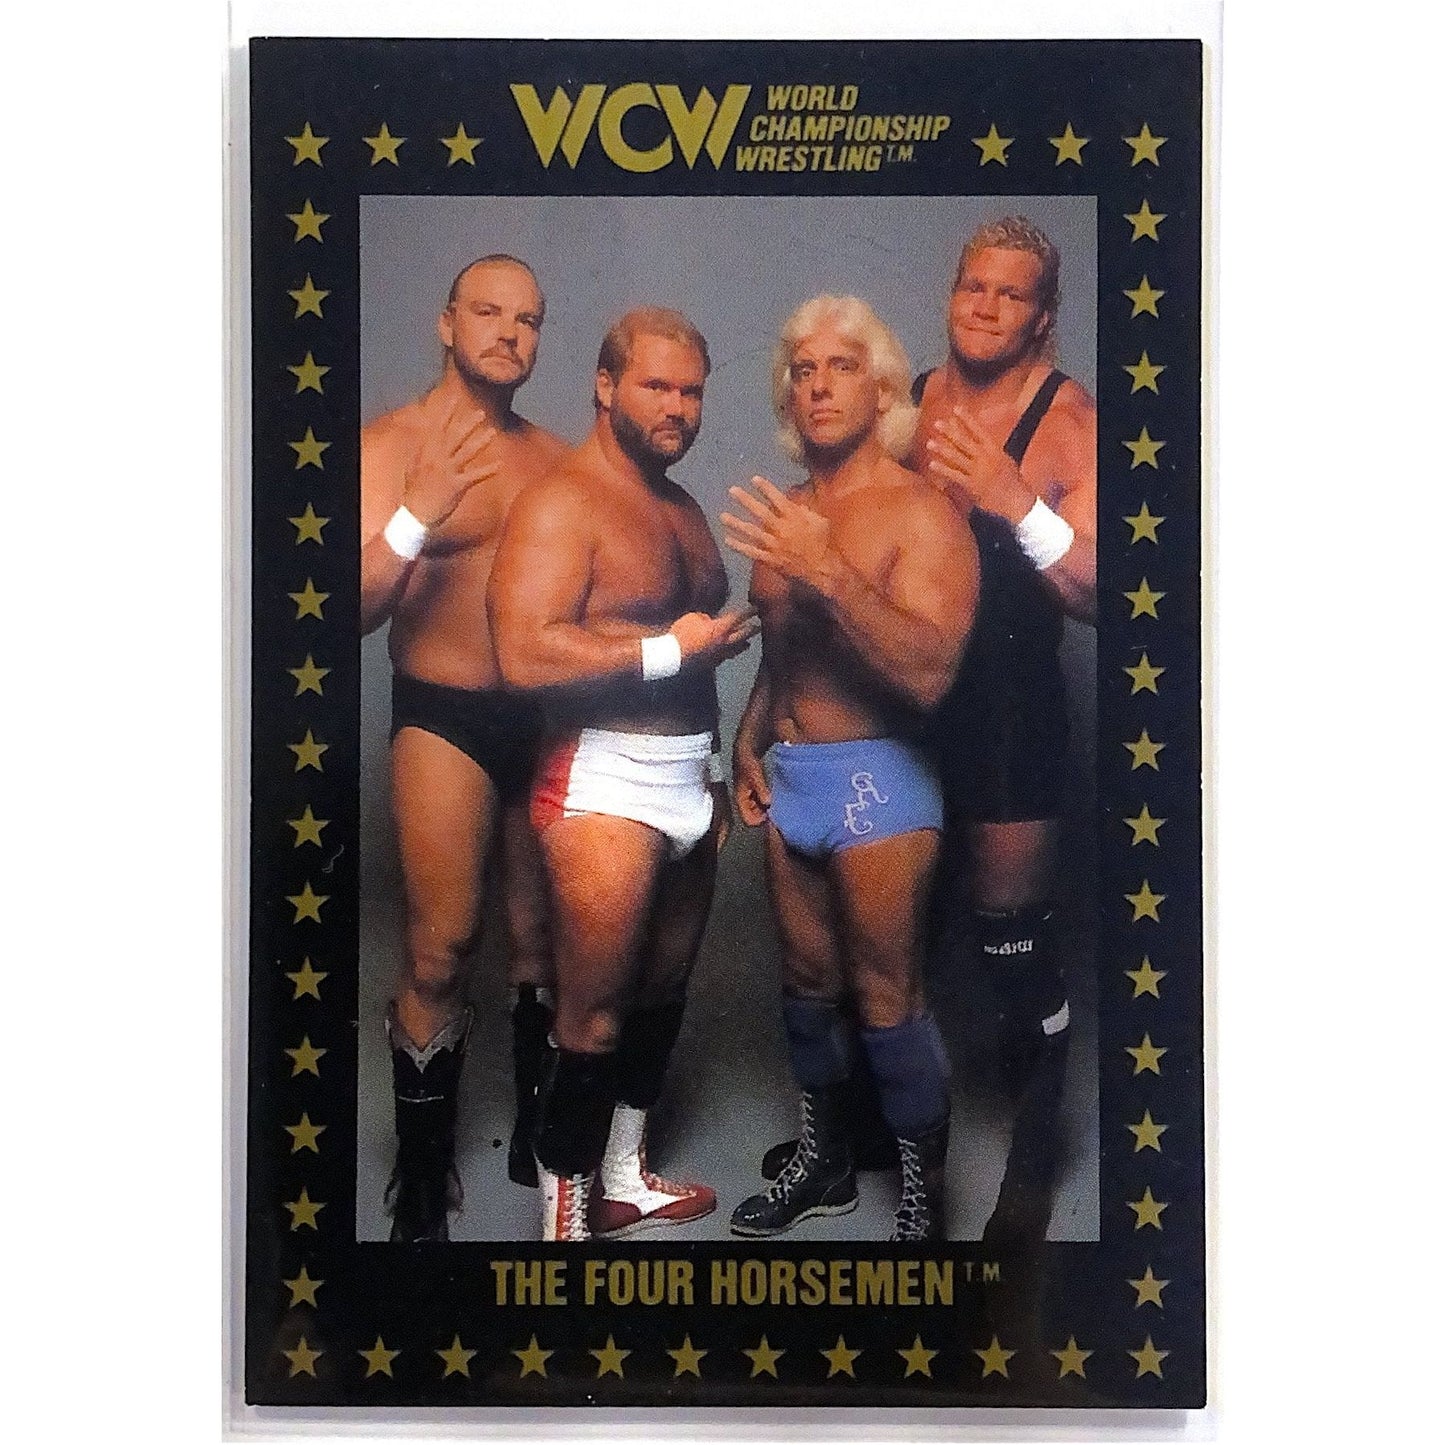  1991 Turner Entertainment WCW The Four Horsemen #14  Local Legends Cards & Collectibles